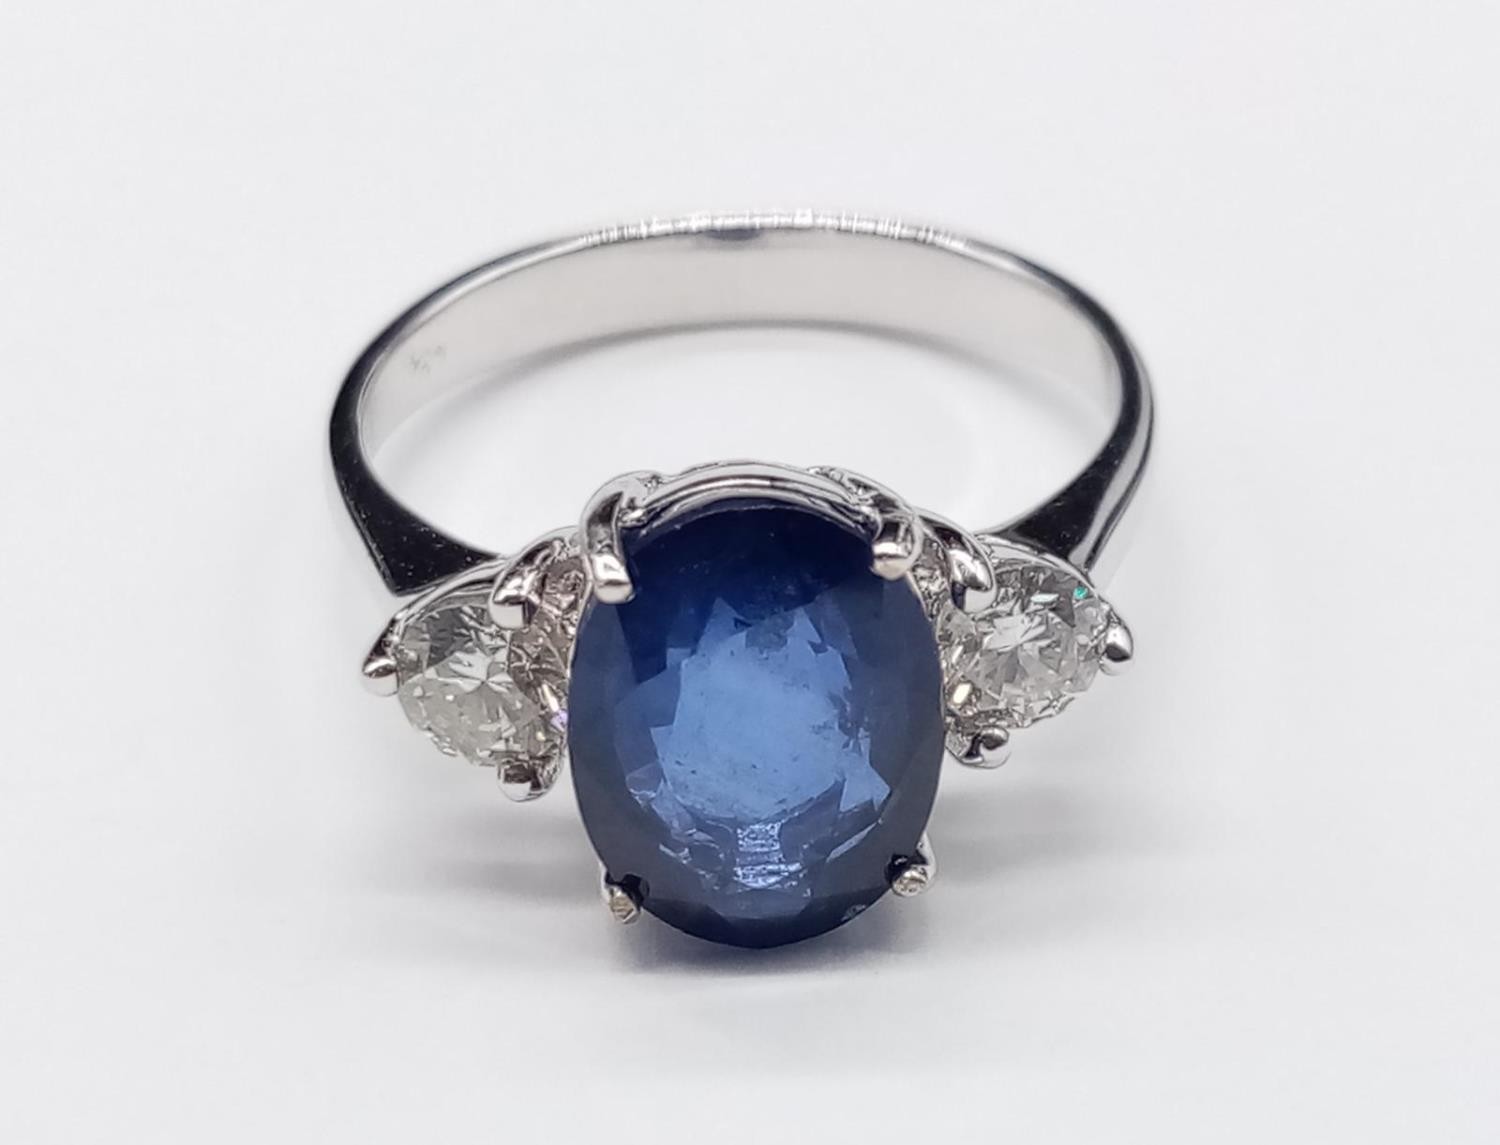 18ct White Gold RING set with one oval cut natural Sapphire and 2x round brilliant cut natural